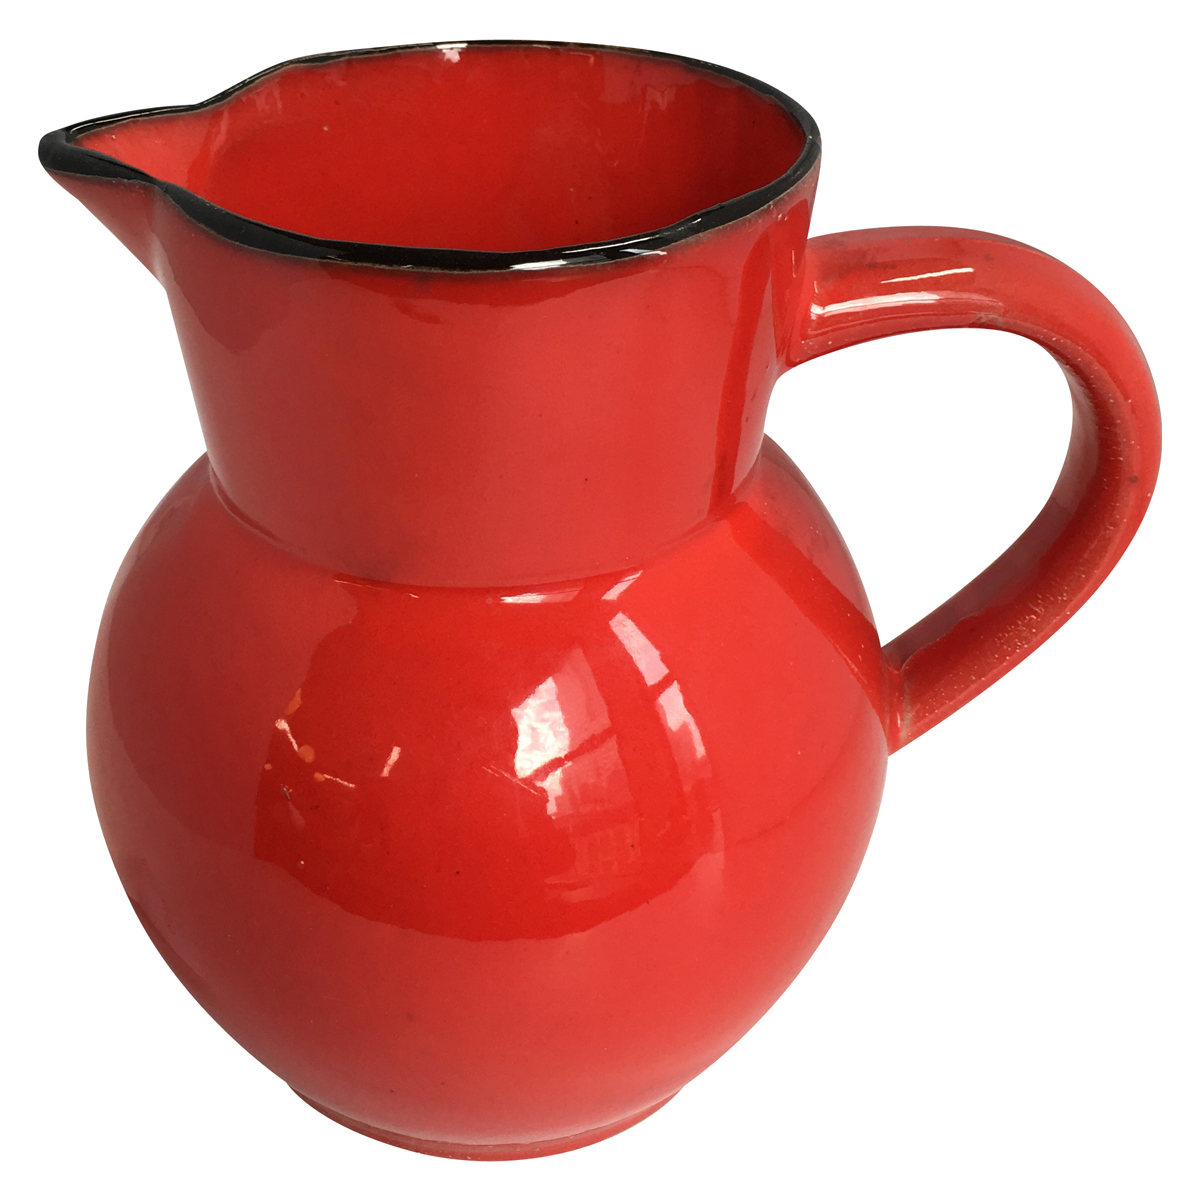 Bulbous Red Ceramic Pitcher with Black Edge Spout - Lost and Found